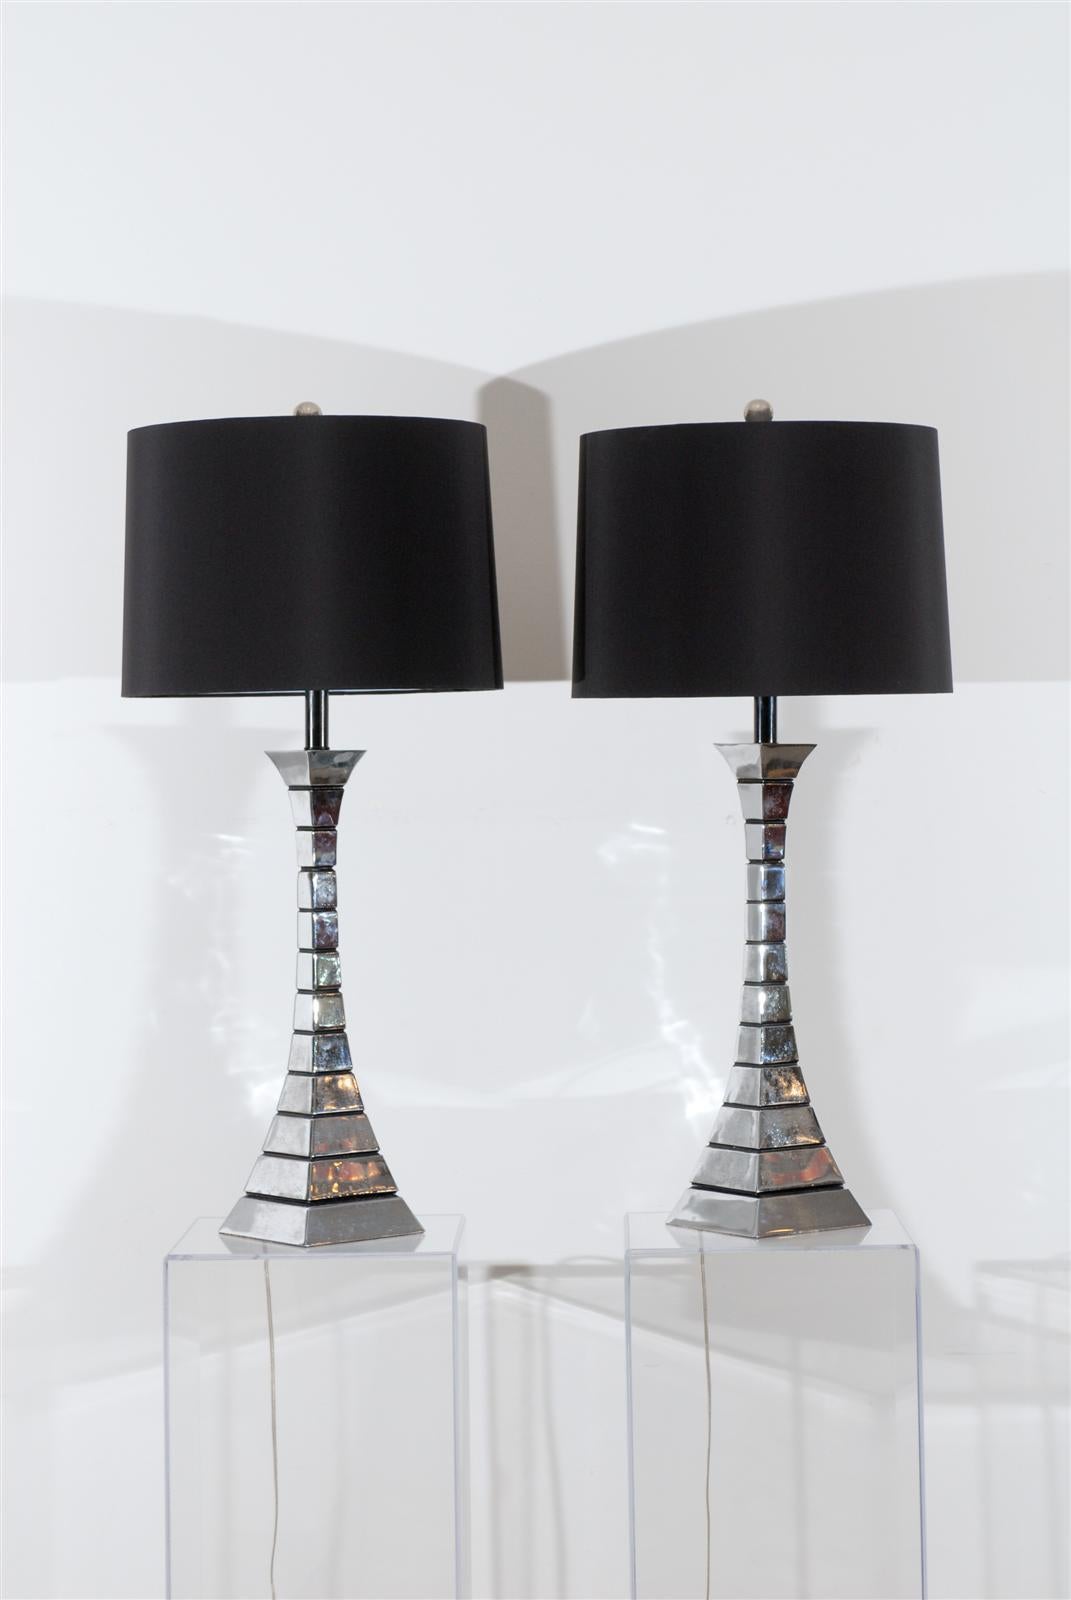 Striking pair of midcentury chrome-plated lamps. Shown with black silk drum shades. (Shades available at additional charge.) Rewired with clear cords and chrome ball finials. 

Measures: 35